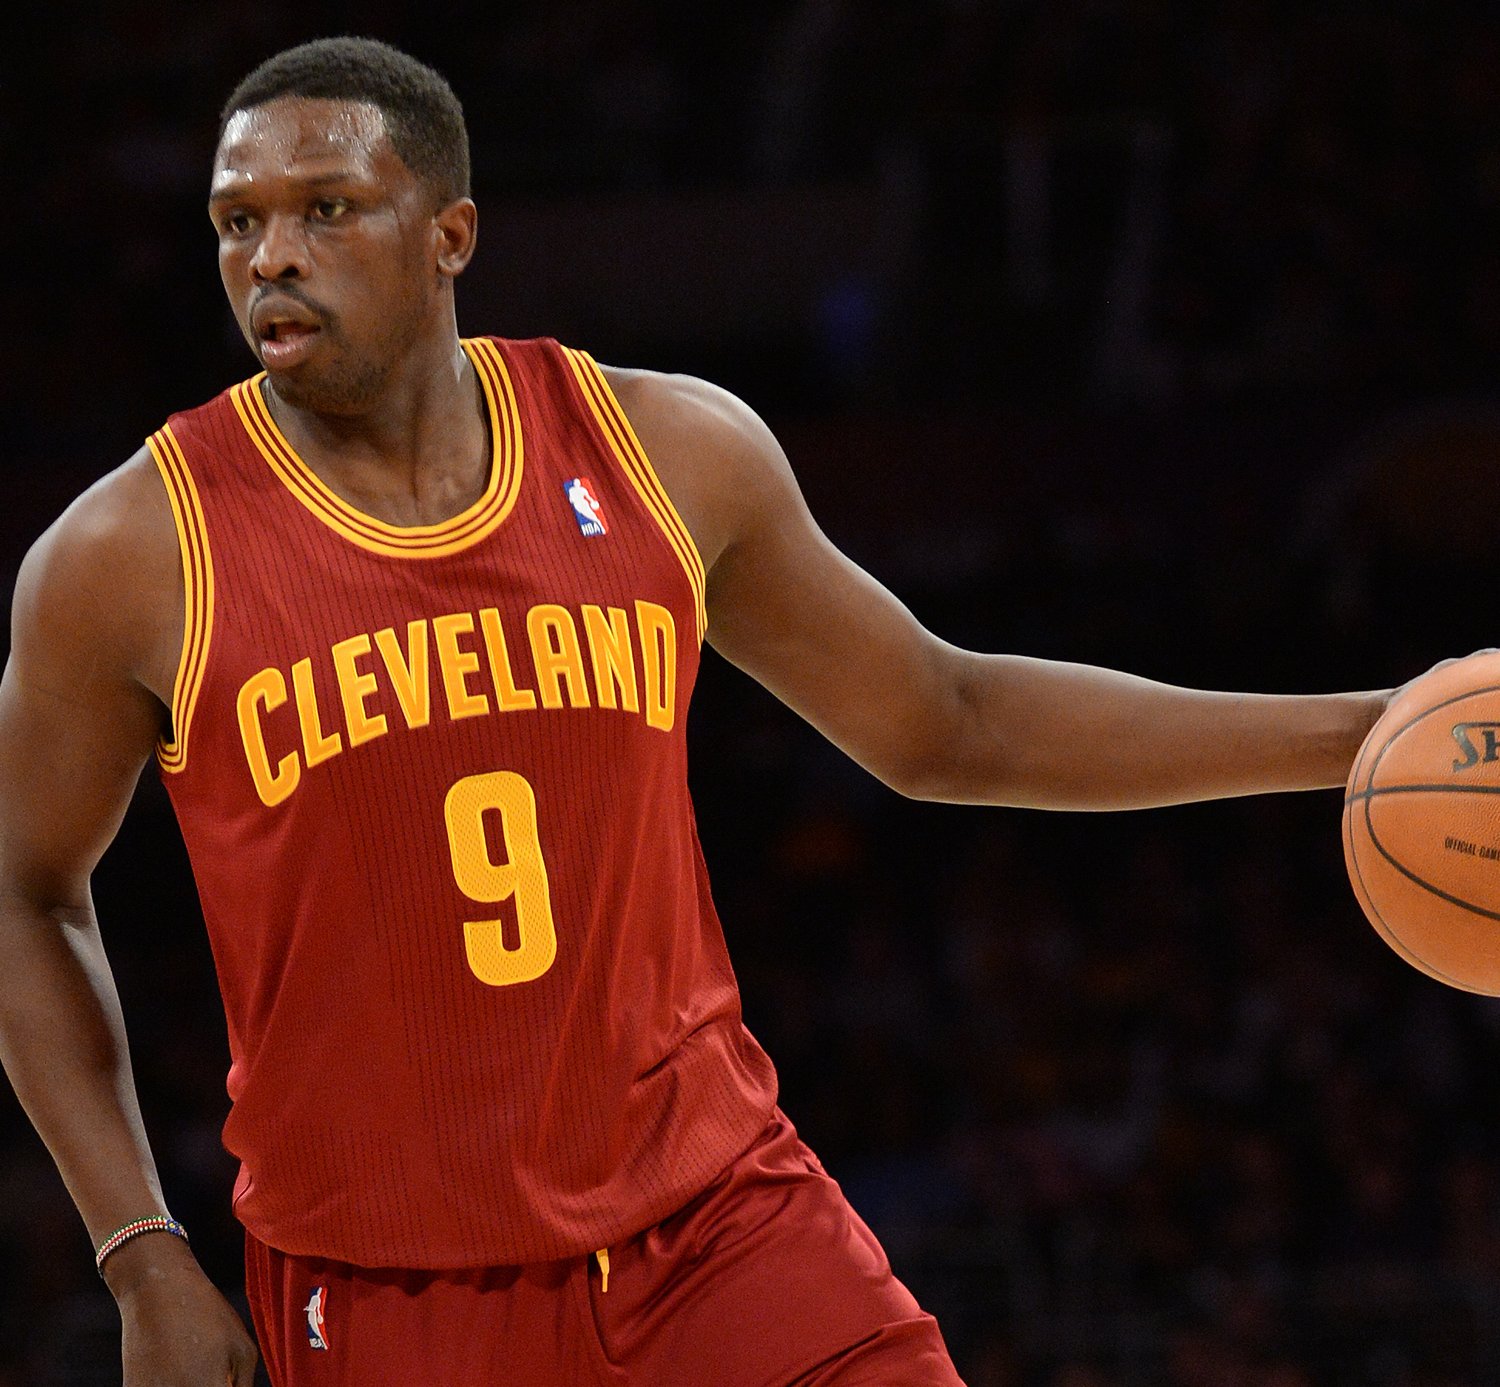 hi-res-463117987-luol-deng-of-the-cleveland-cavaliers-dribbles-the-ball_crop_exact.jpg